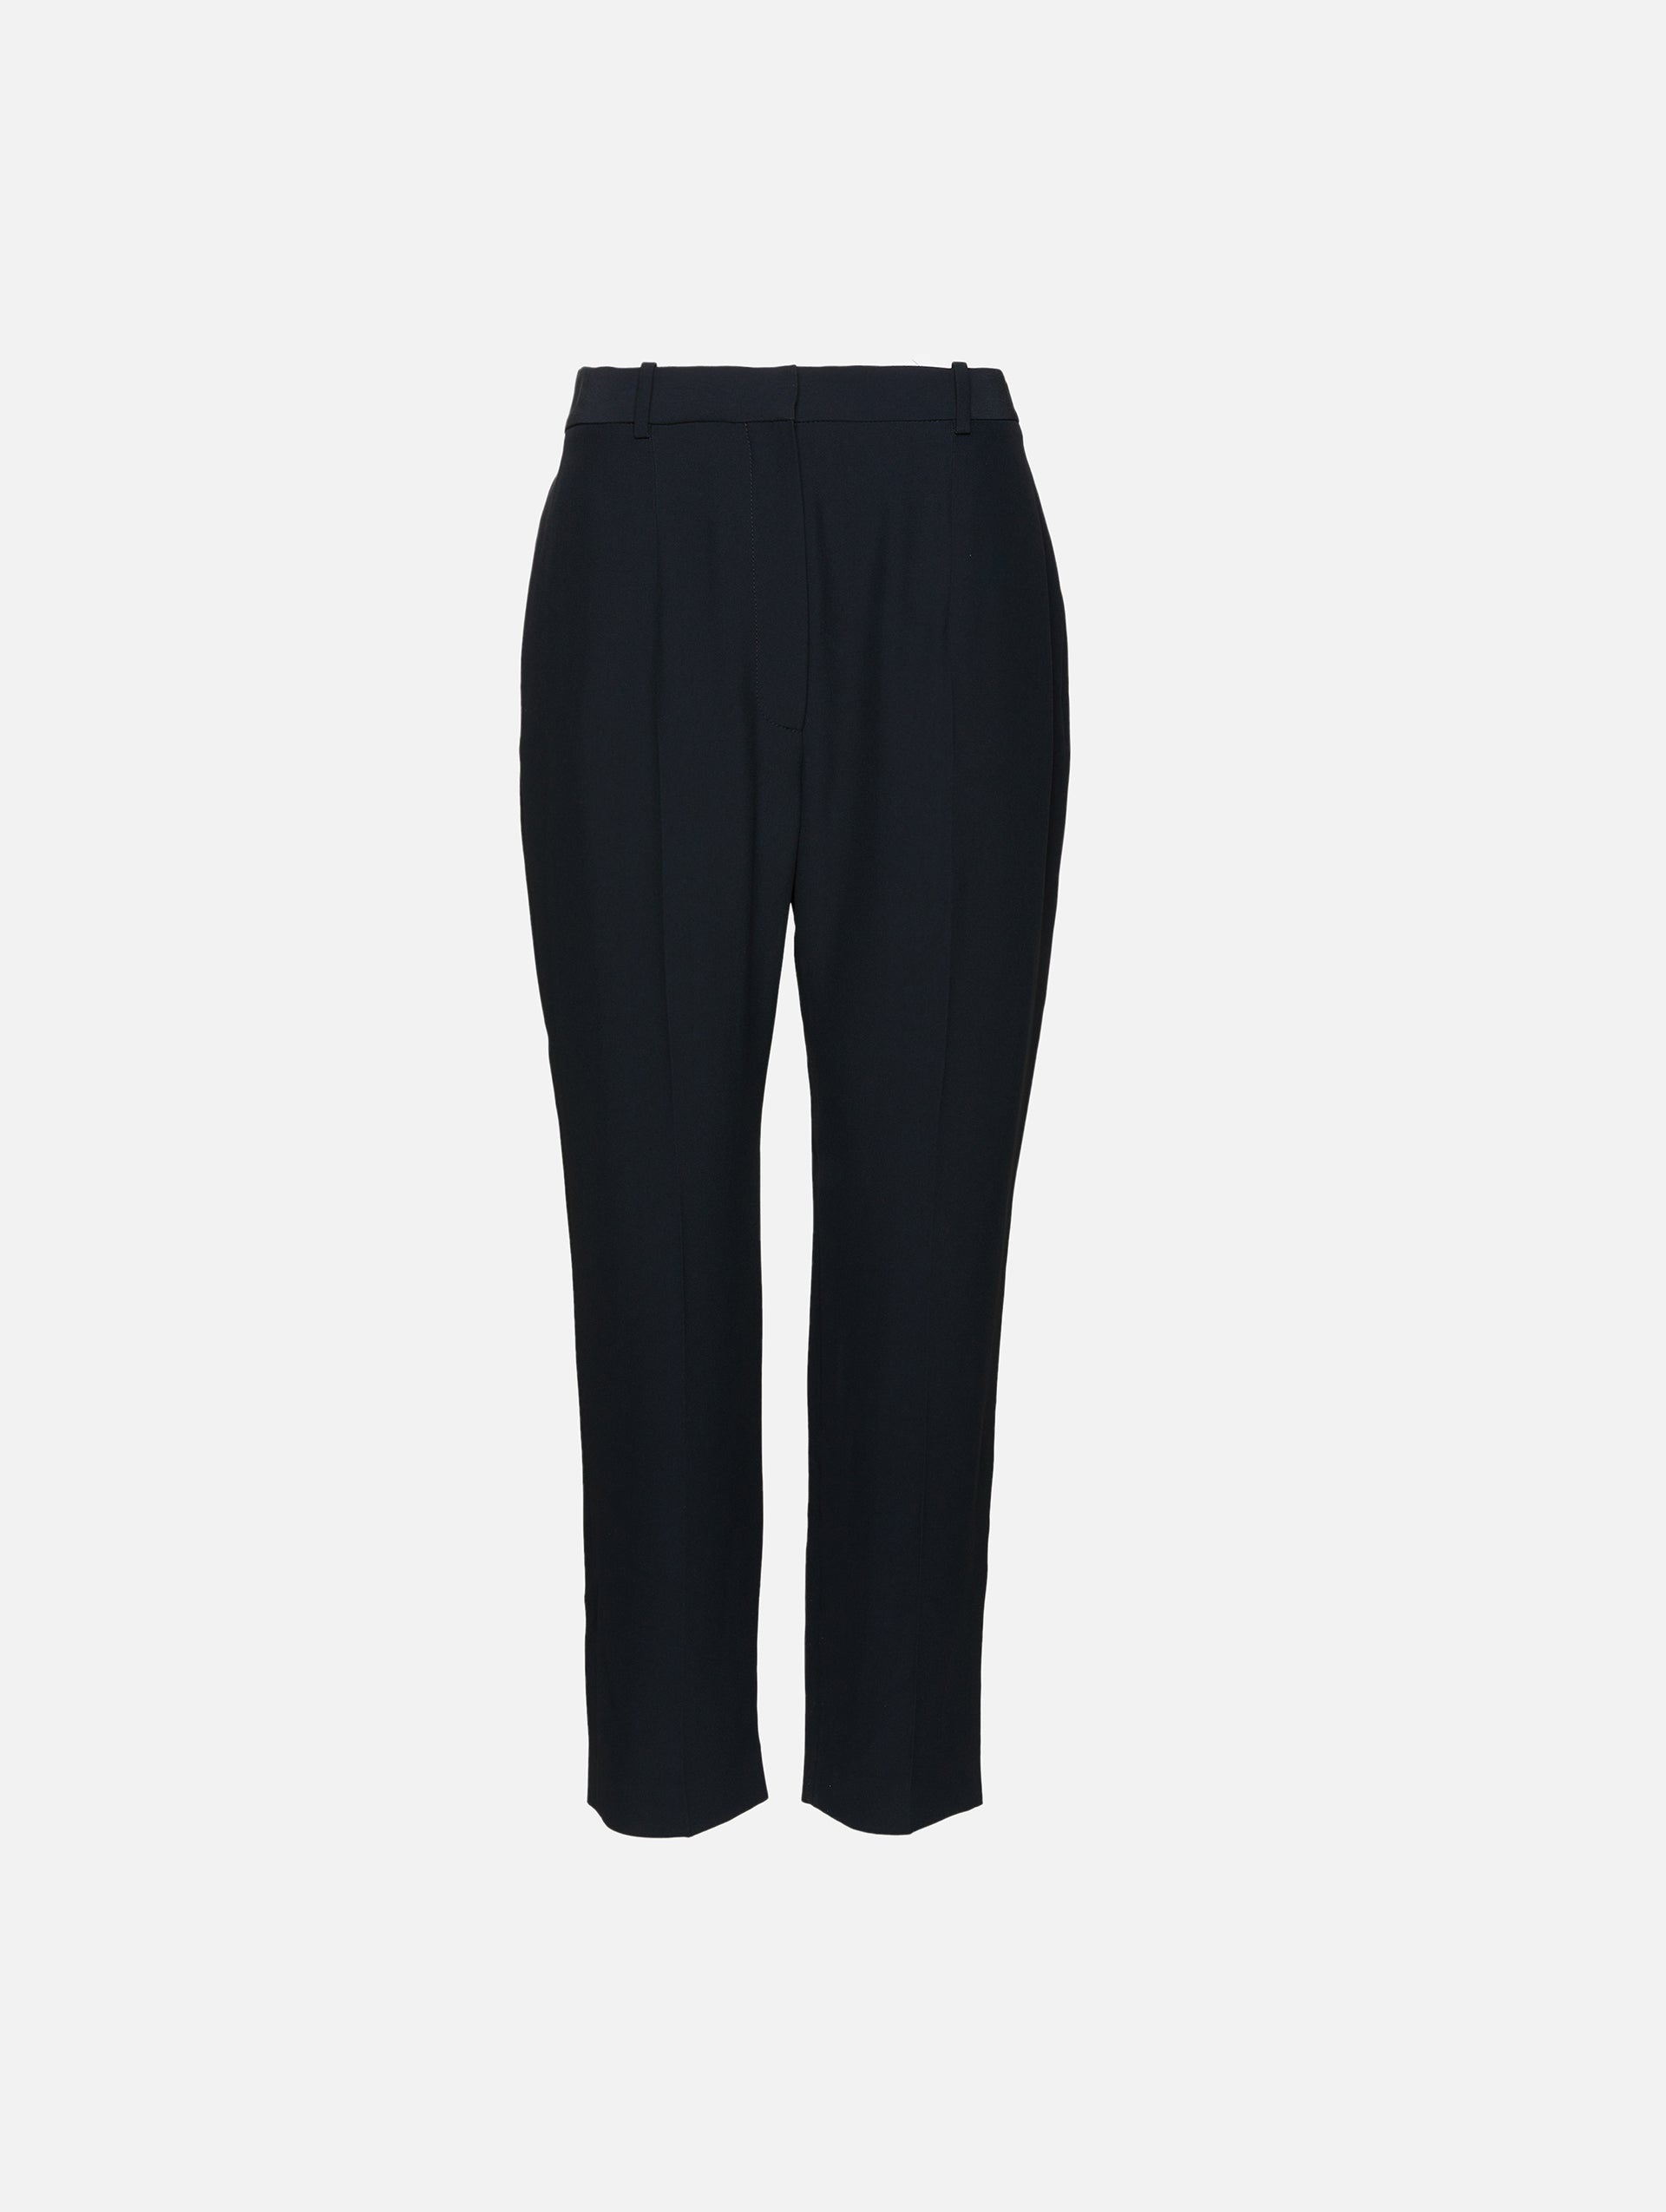 Madilyn Pants - High Waisted Cigarette Pants in Black | Showpo USA